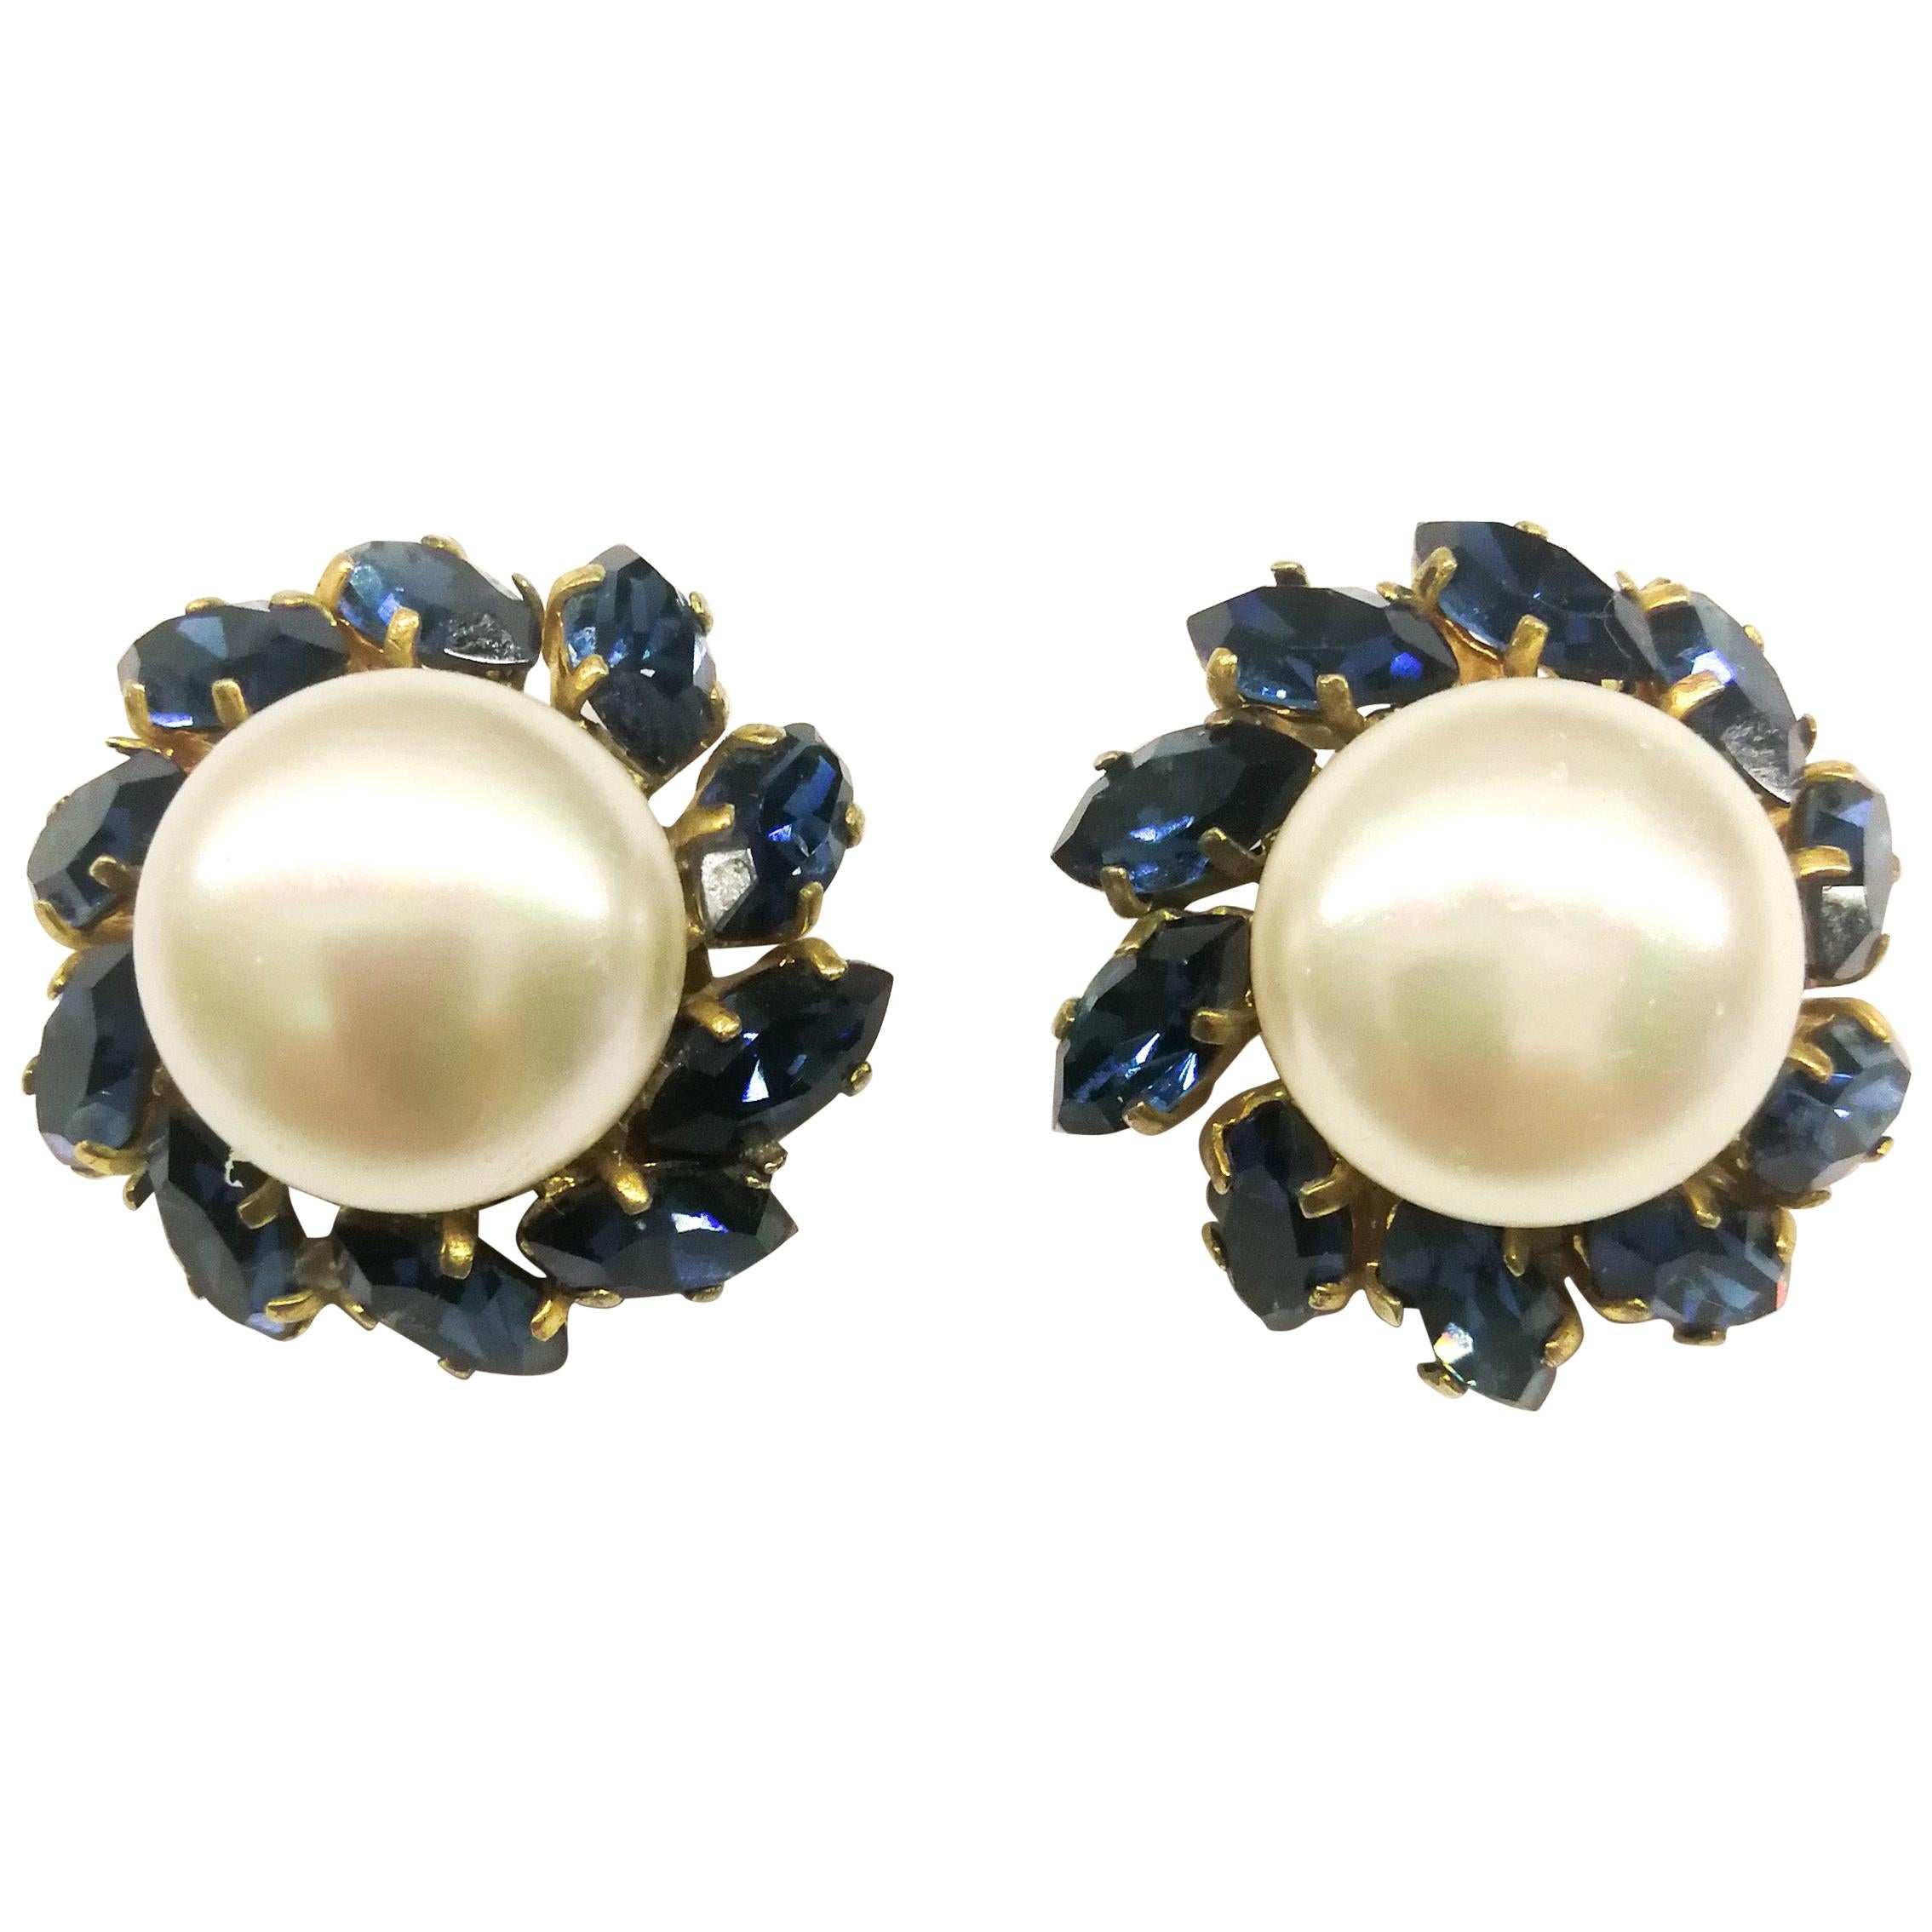 Baroque pearl and rich sapphire paste earrings, Chanel, 1950s/60s, France.